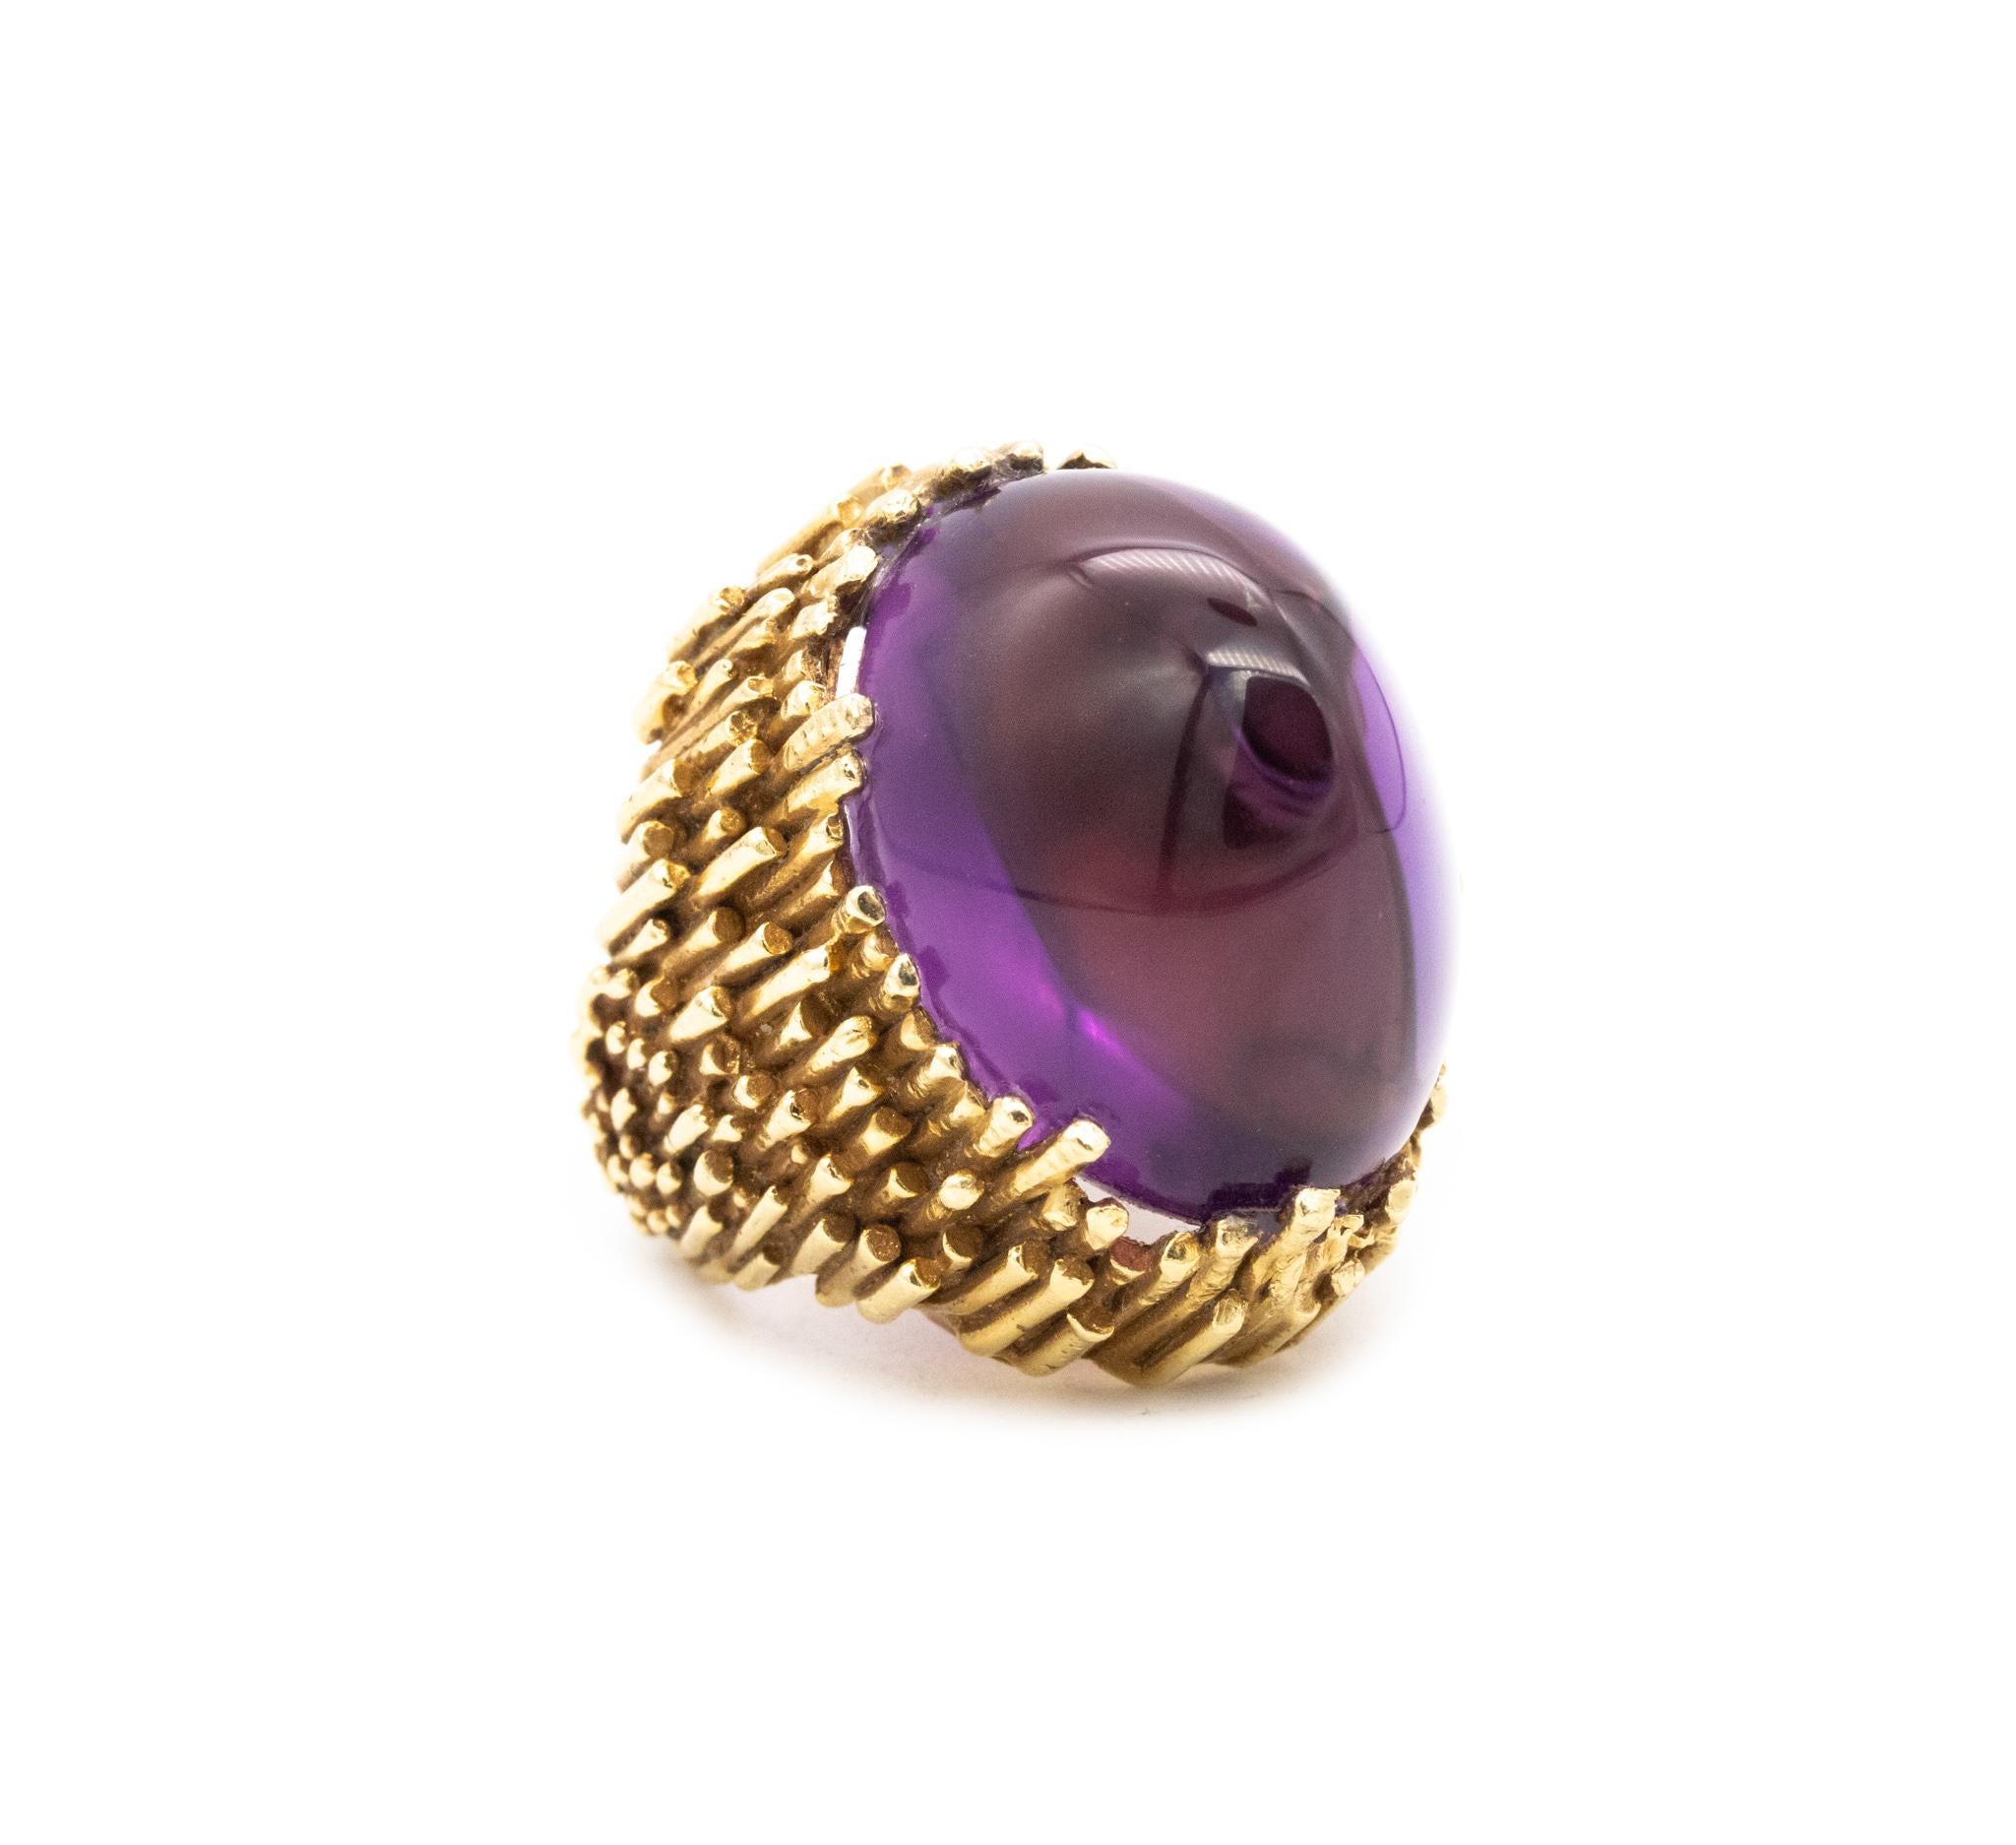 Erwin Pearl 1960 New York Massive Cocktail Ring In 18Kt Gold 45.28 Cts Amethyst 1